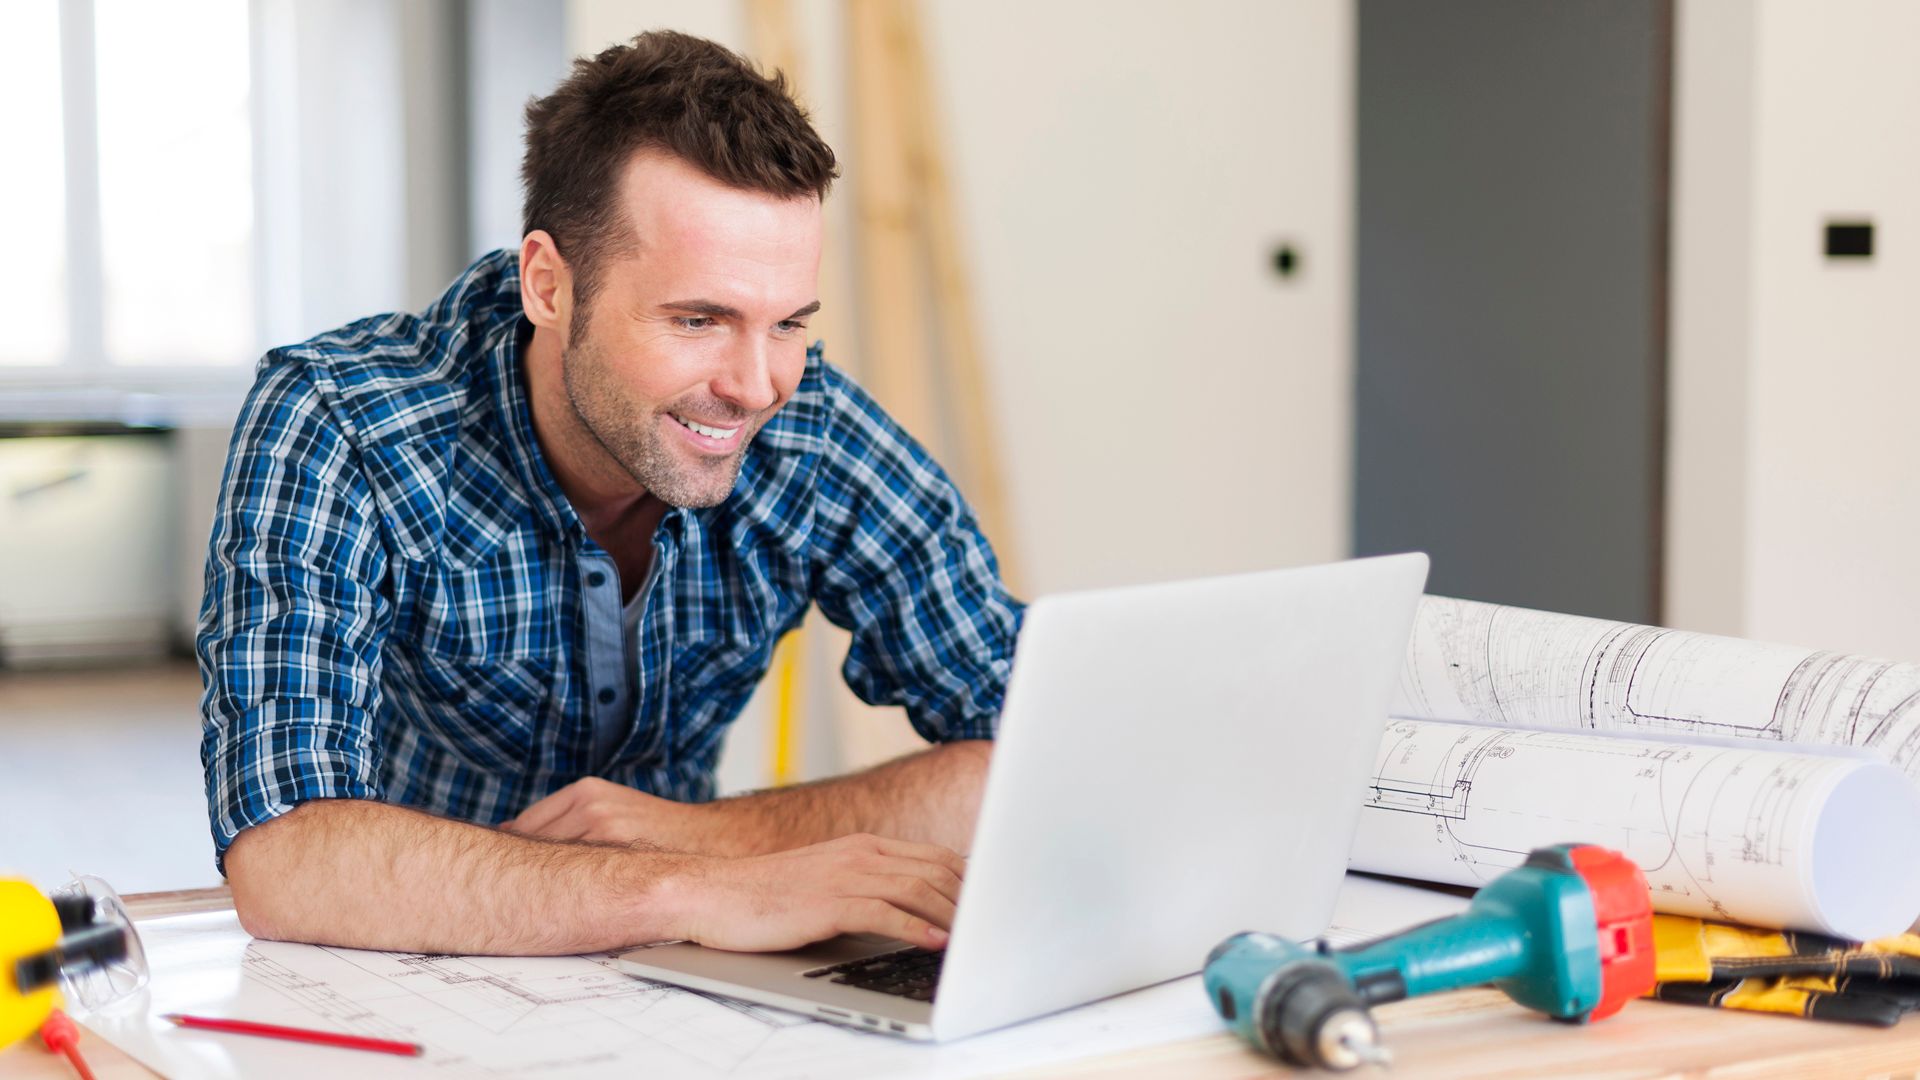 Smiling DIY construction worker man working with laptop 